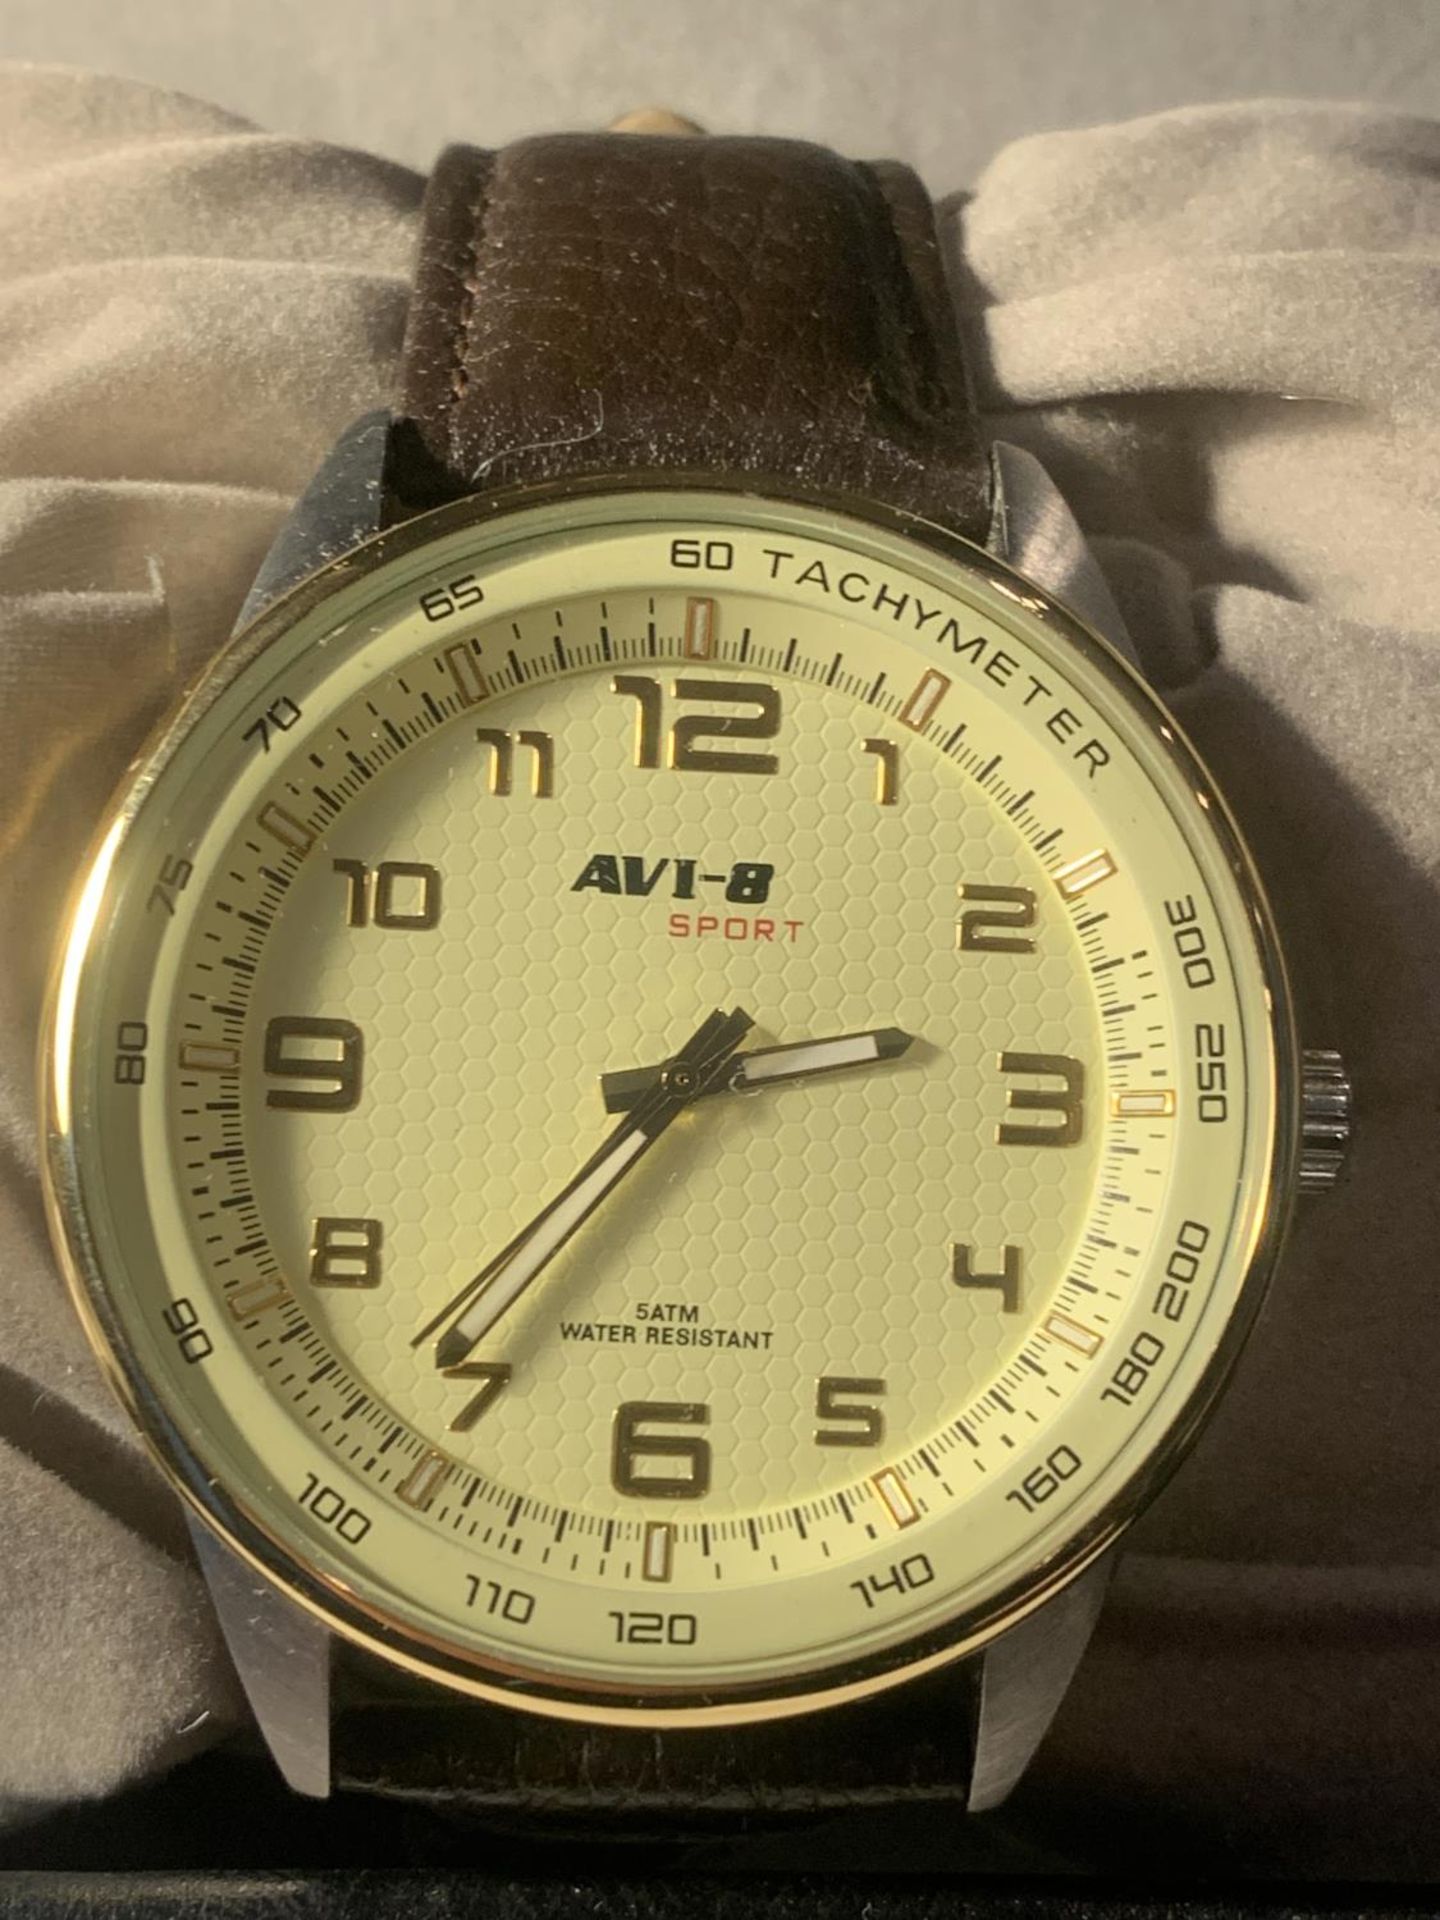 AN AS NEW AND BOXED AVI-8 SPORT TACHYMETER WATER RESISTANT WRIST WATCH SEEN WORKING BUT NO WARRANTY - Bild 2 aus 3